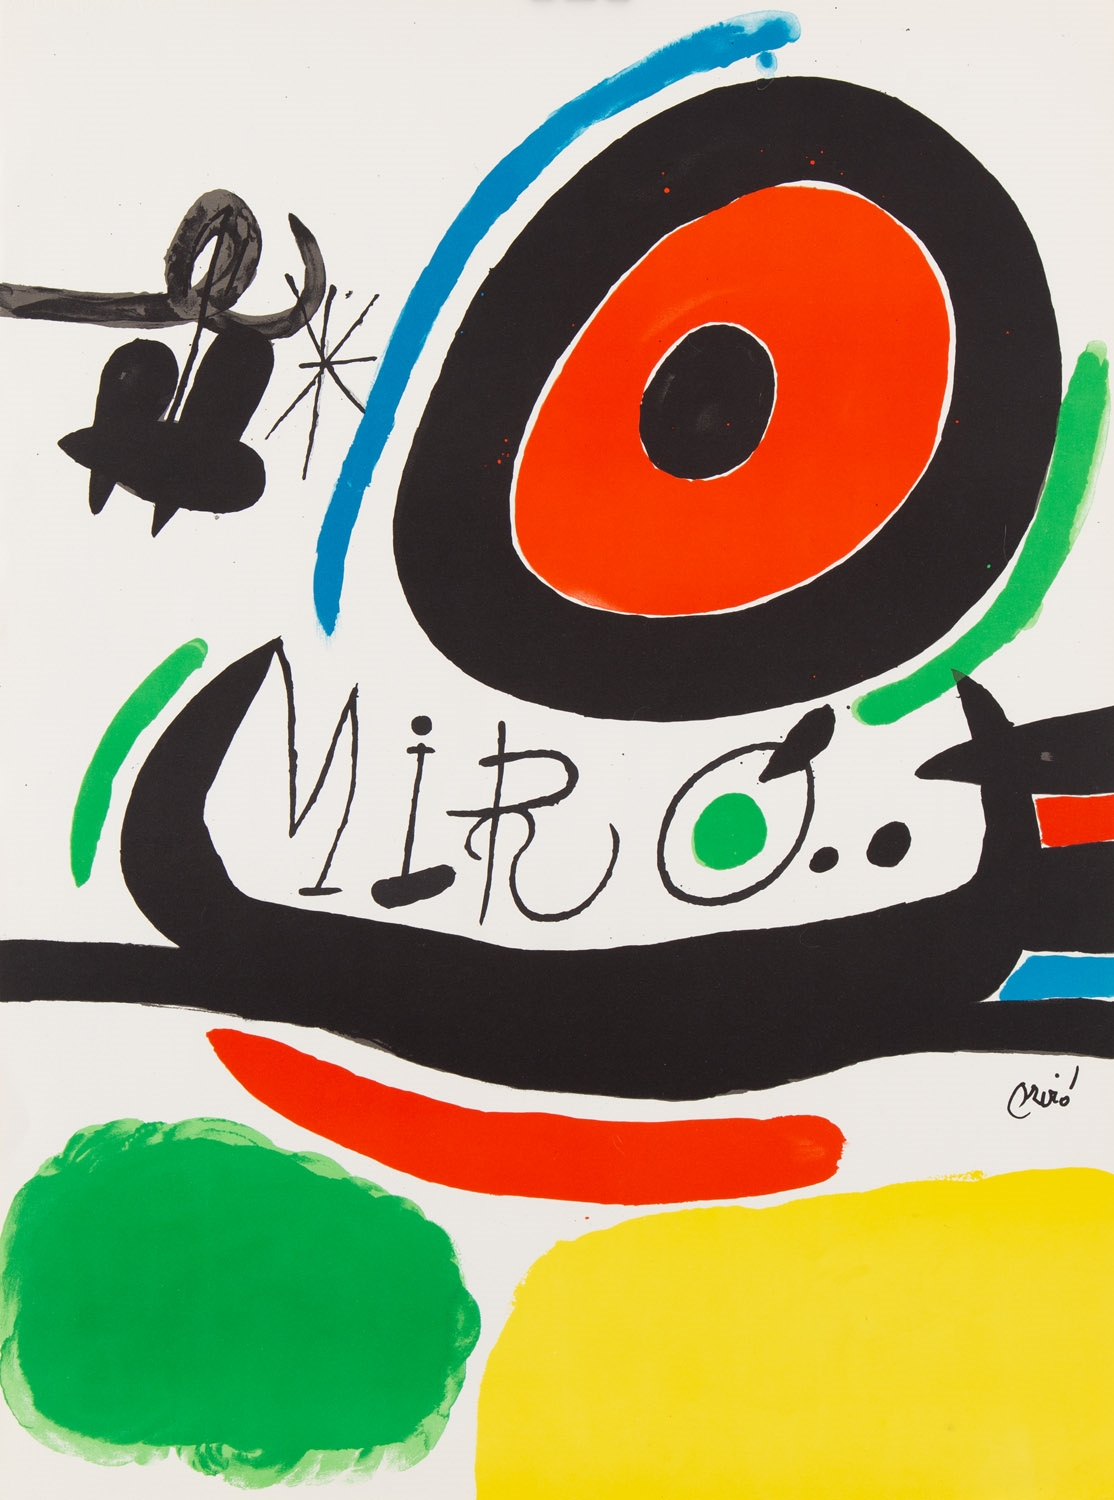 Artwork by Joan Miró, TRES LLIBRES, Made of coloured lithography